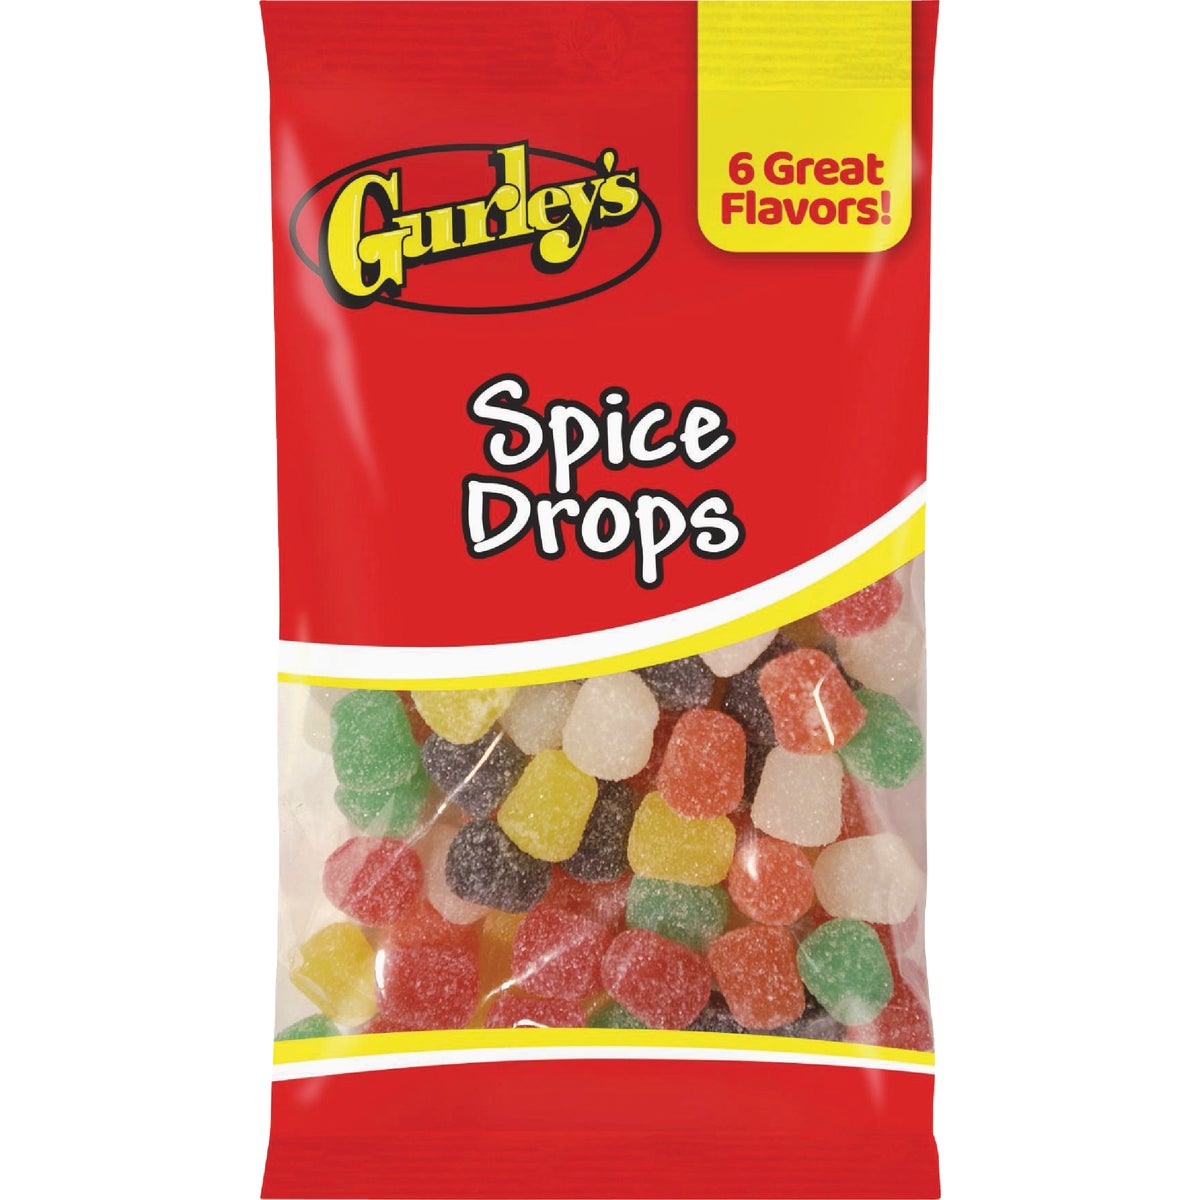 Gurley's 7.5 Oz. Spice Drops